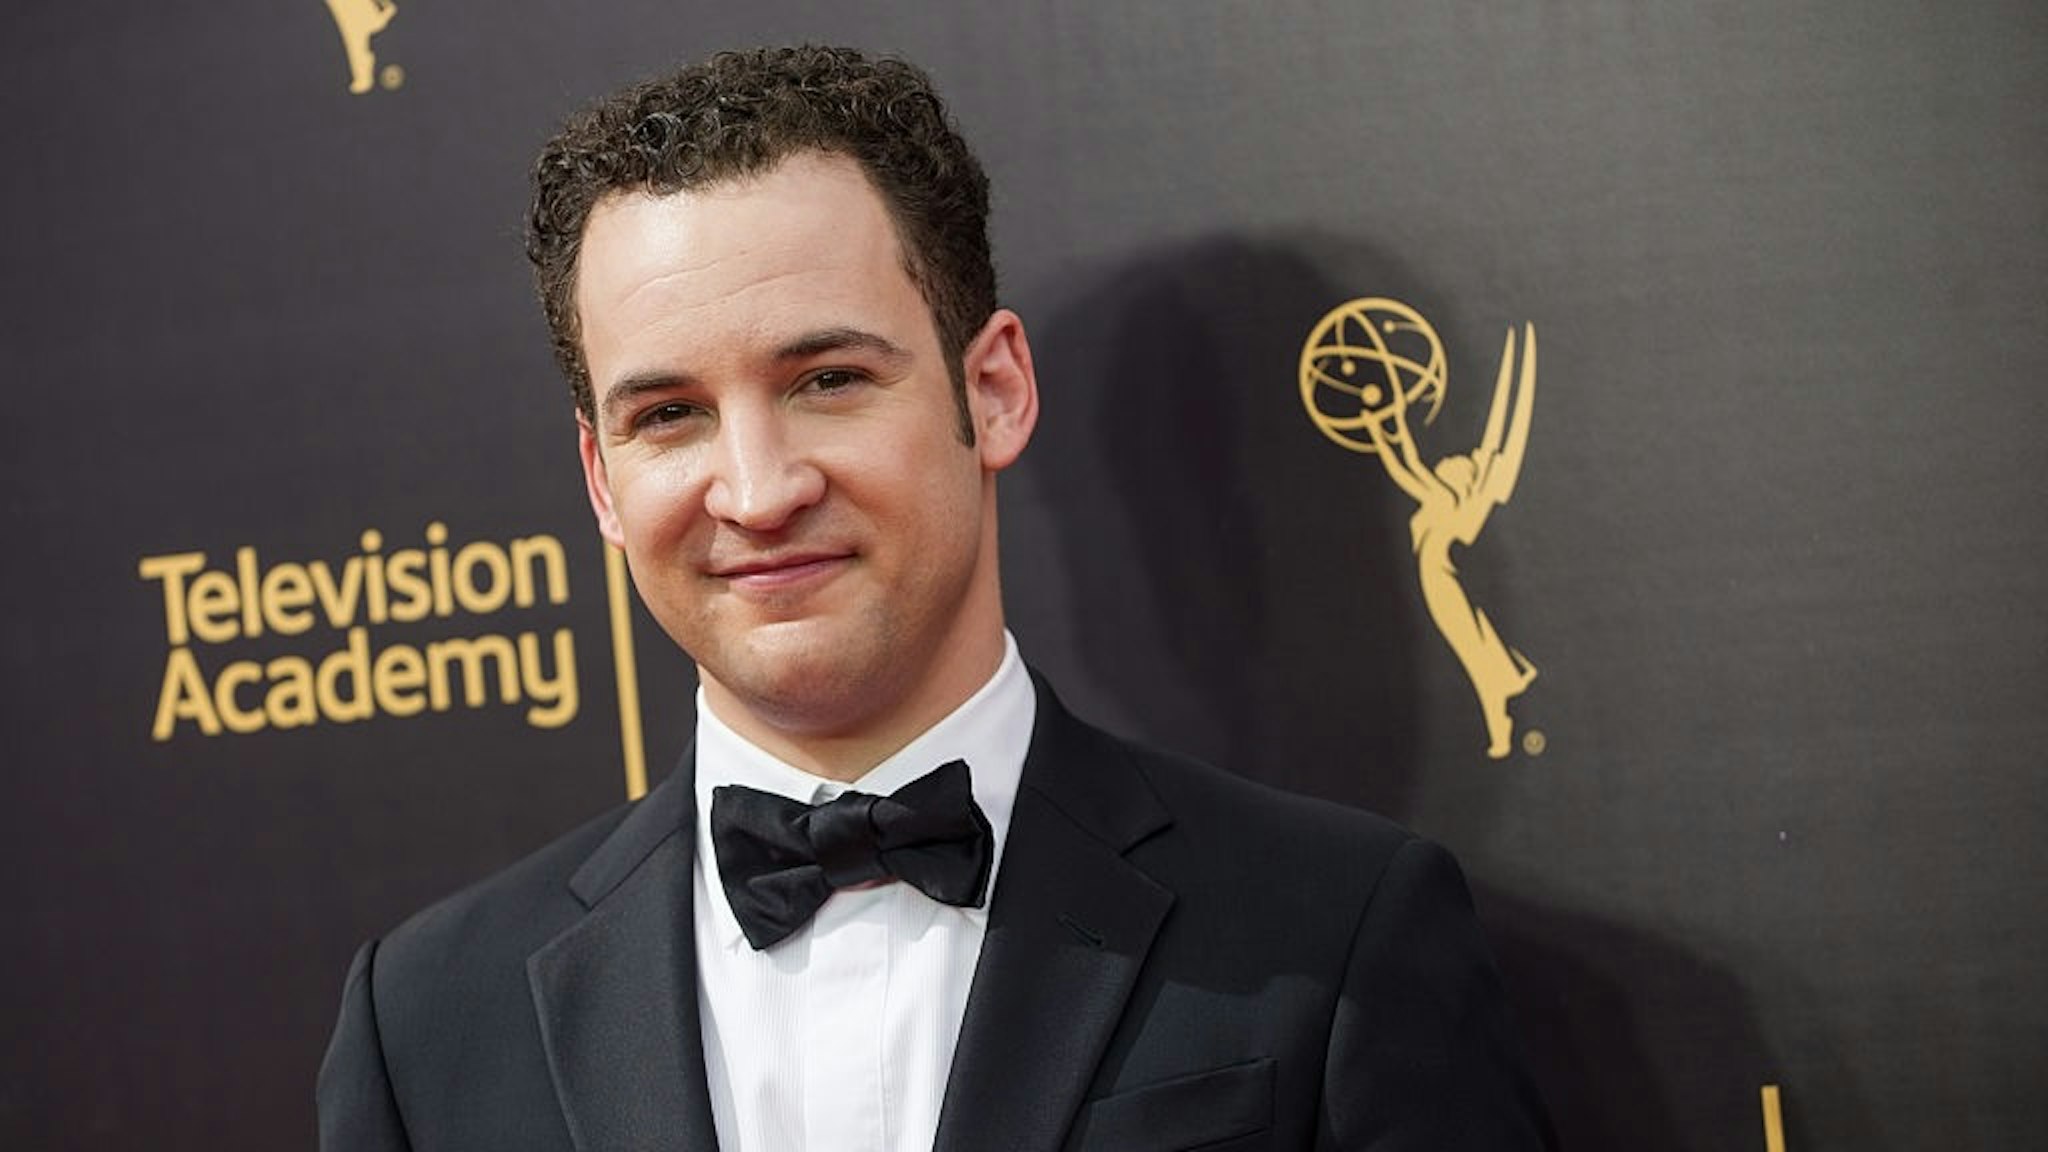 2016 Creative Arts Emmy Awards - Day 1 - Arrivals LOS ANGELES, CA - SEPTEMBER 10: Ben Savage arrives at the Creative Arts Emmy Awards at Microsoft Theater on September 10, 2016 in Los Angeles, California. (Photo by Emma McIntyre/Getty Images) Emma McIntyre / Contributor